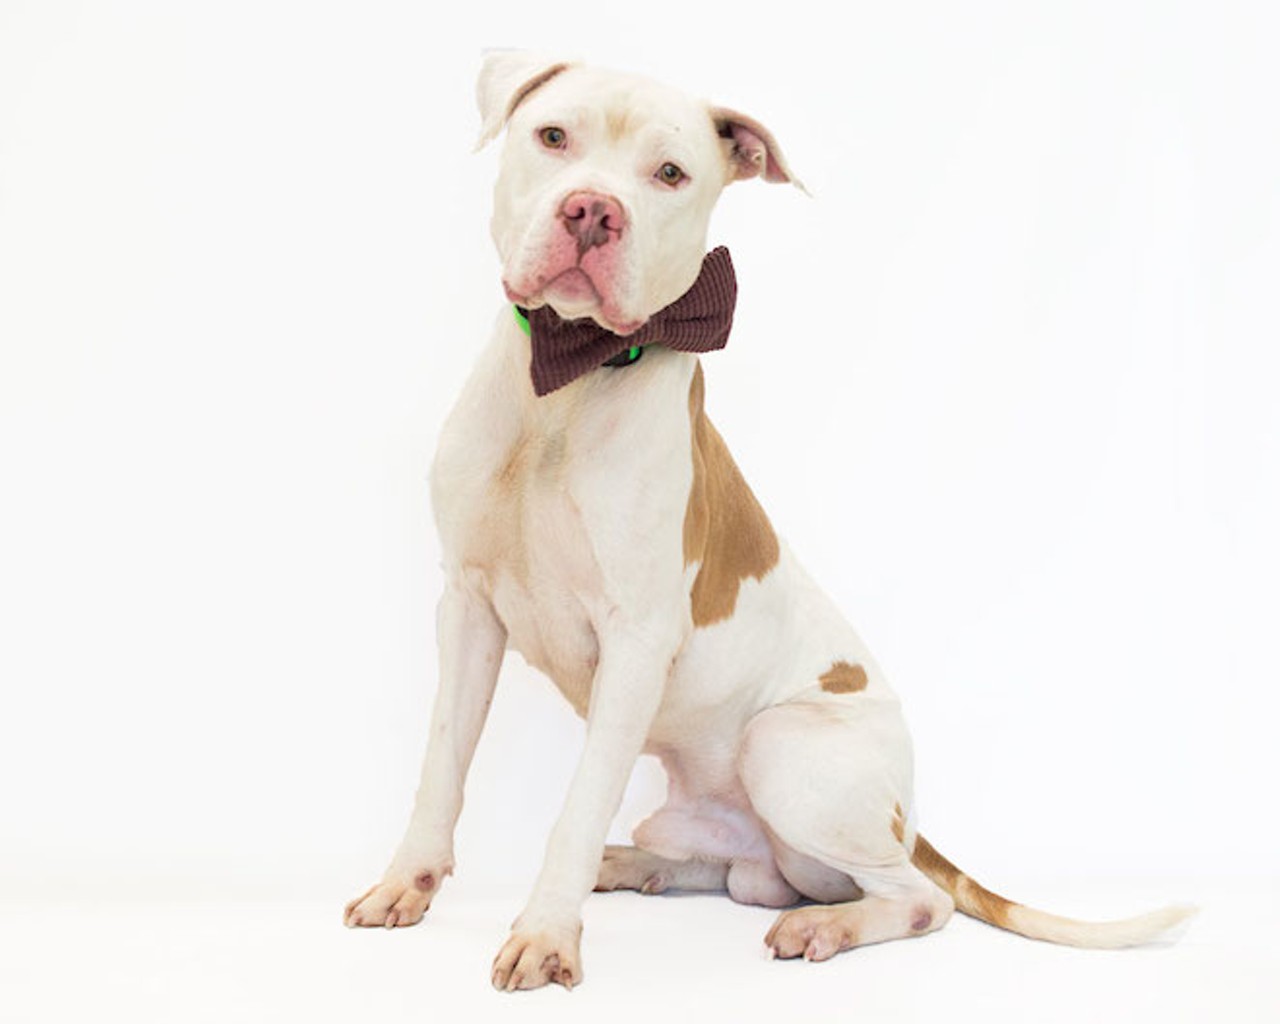 Take me home! 30 darling pups looking for homes at Orange County Animal Services